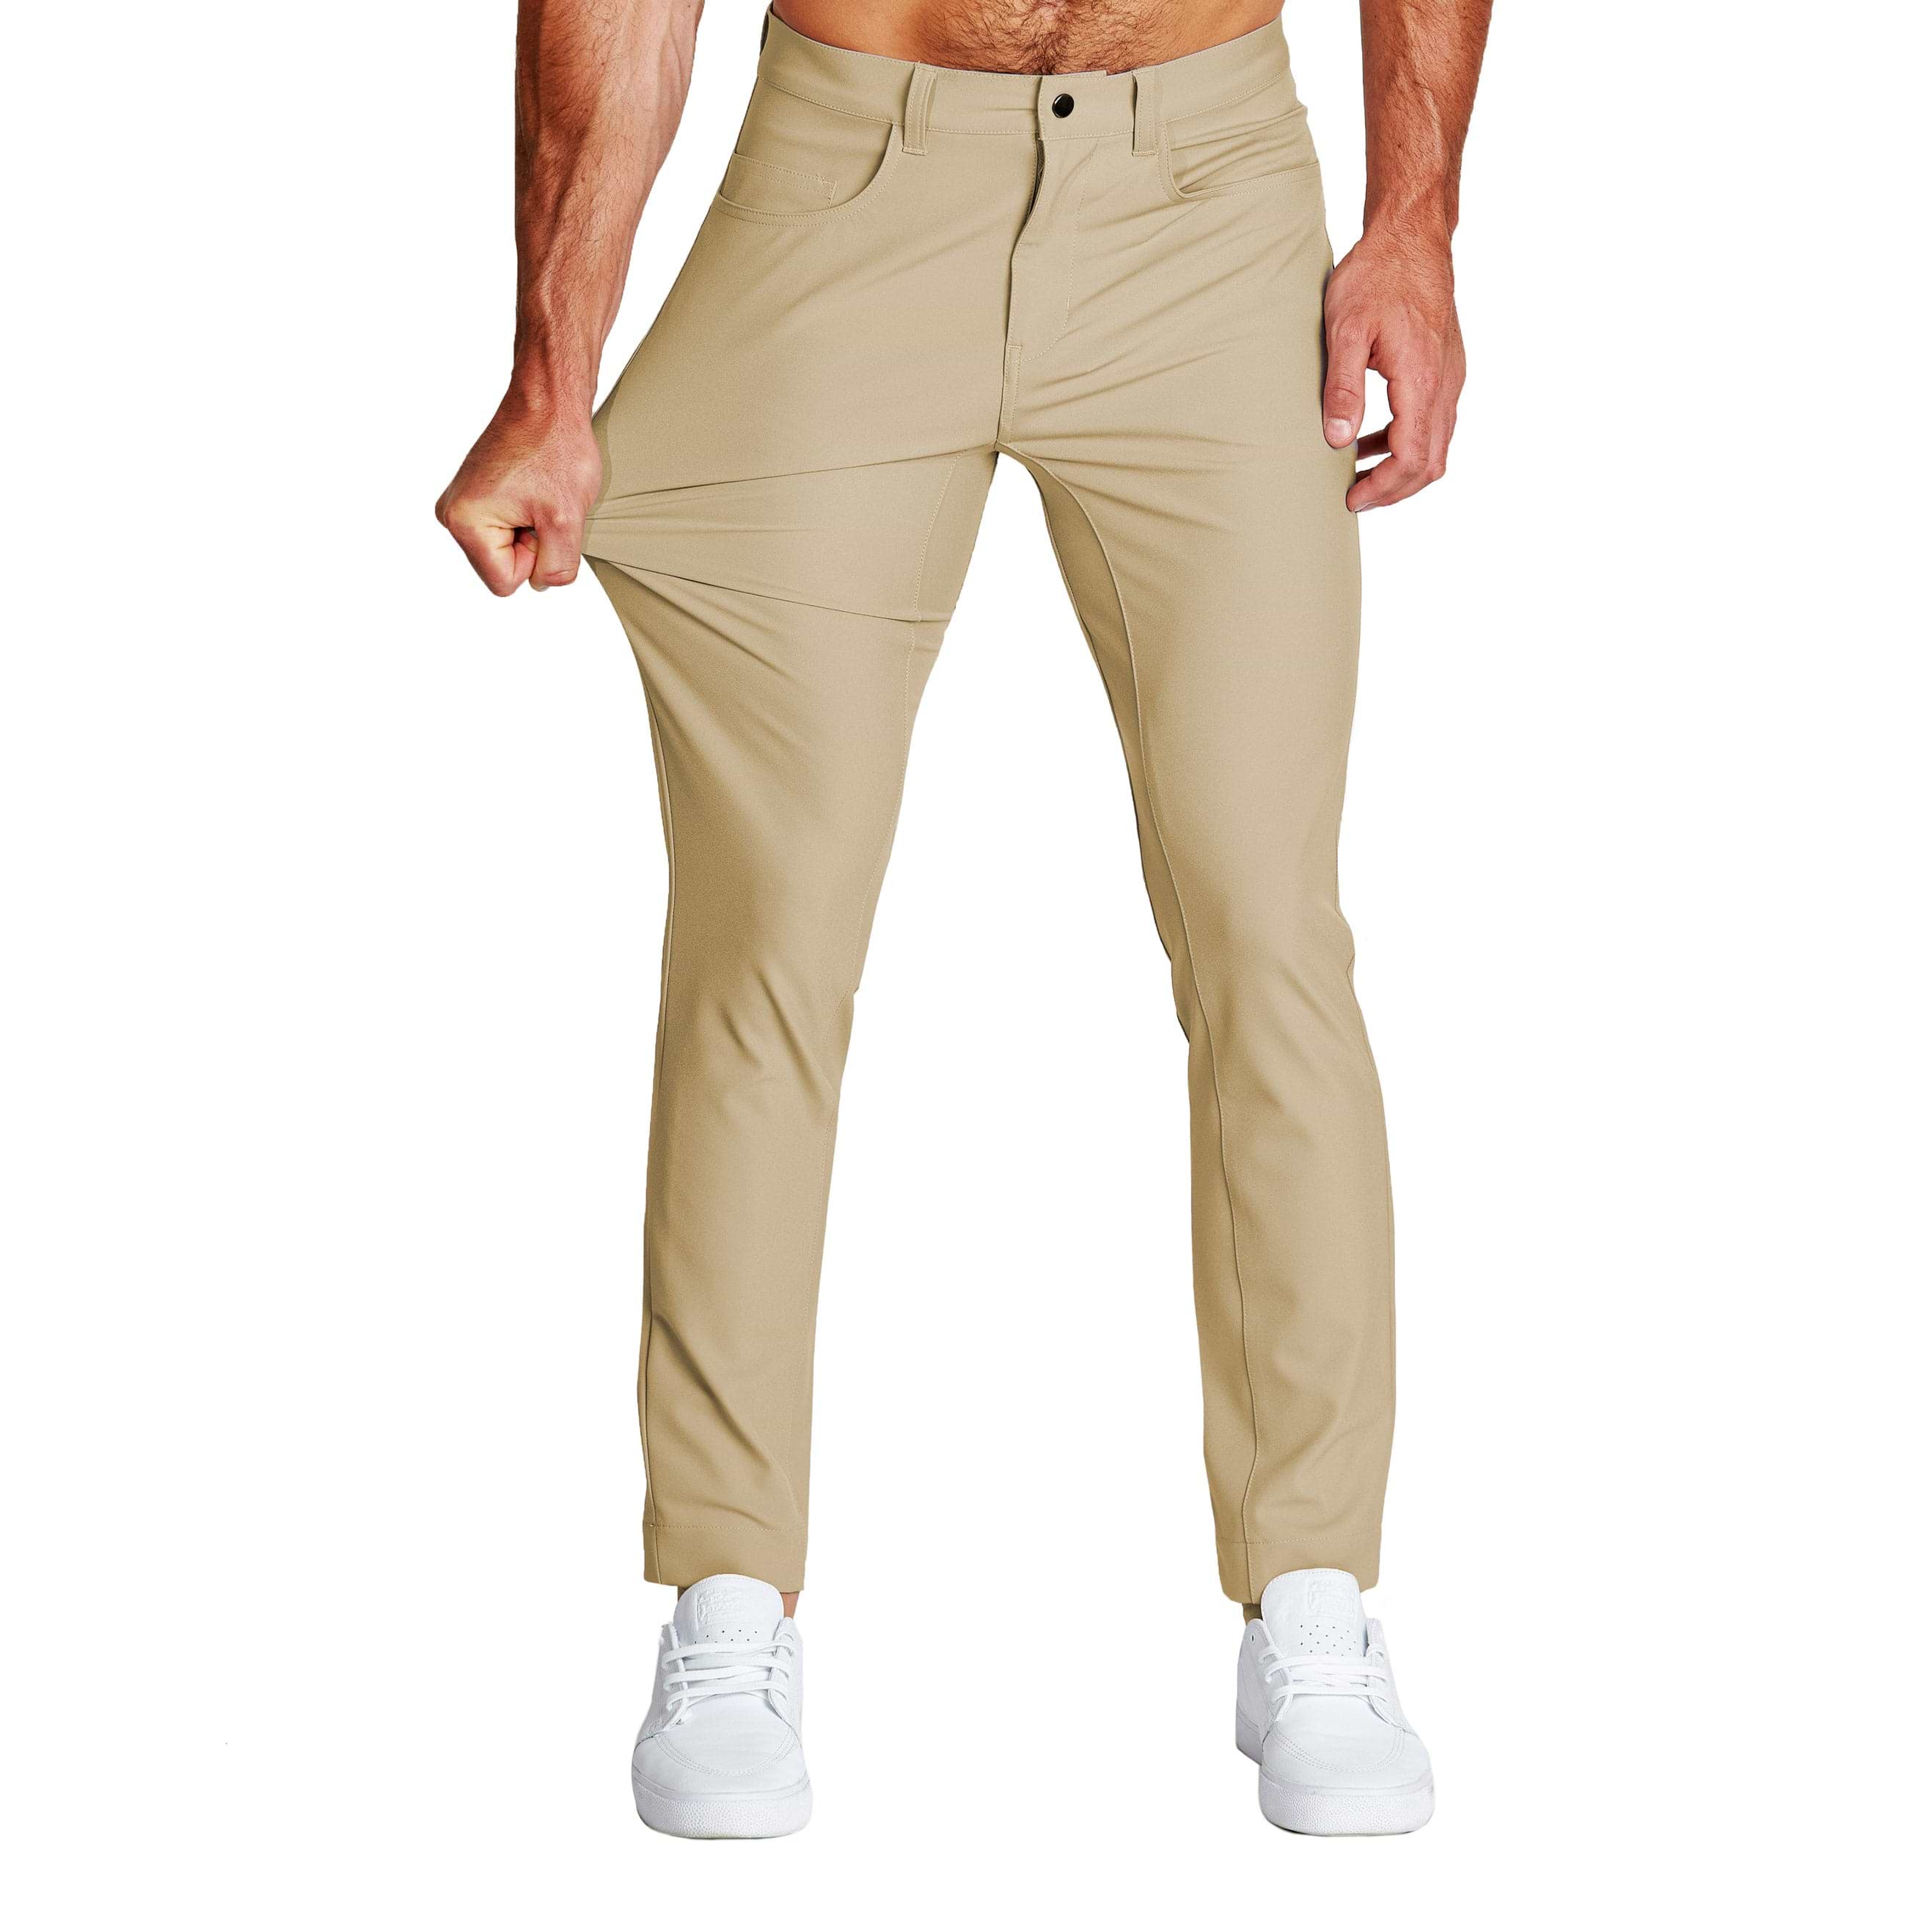 Men's Every Wear Athletic Fit Chino Pants - Goodfellow & Co™ Dapper Brown  34x30 : Target